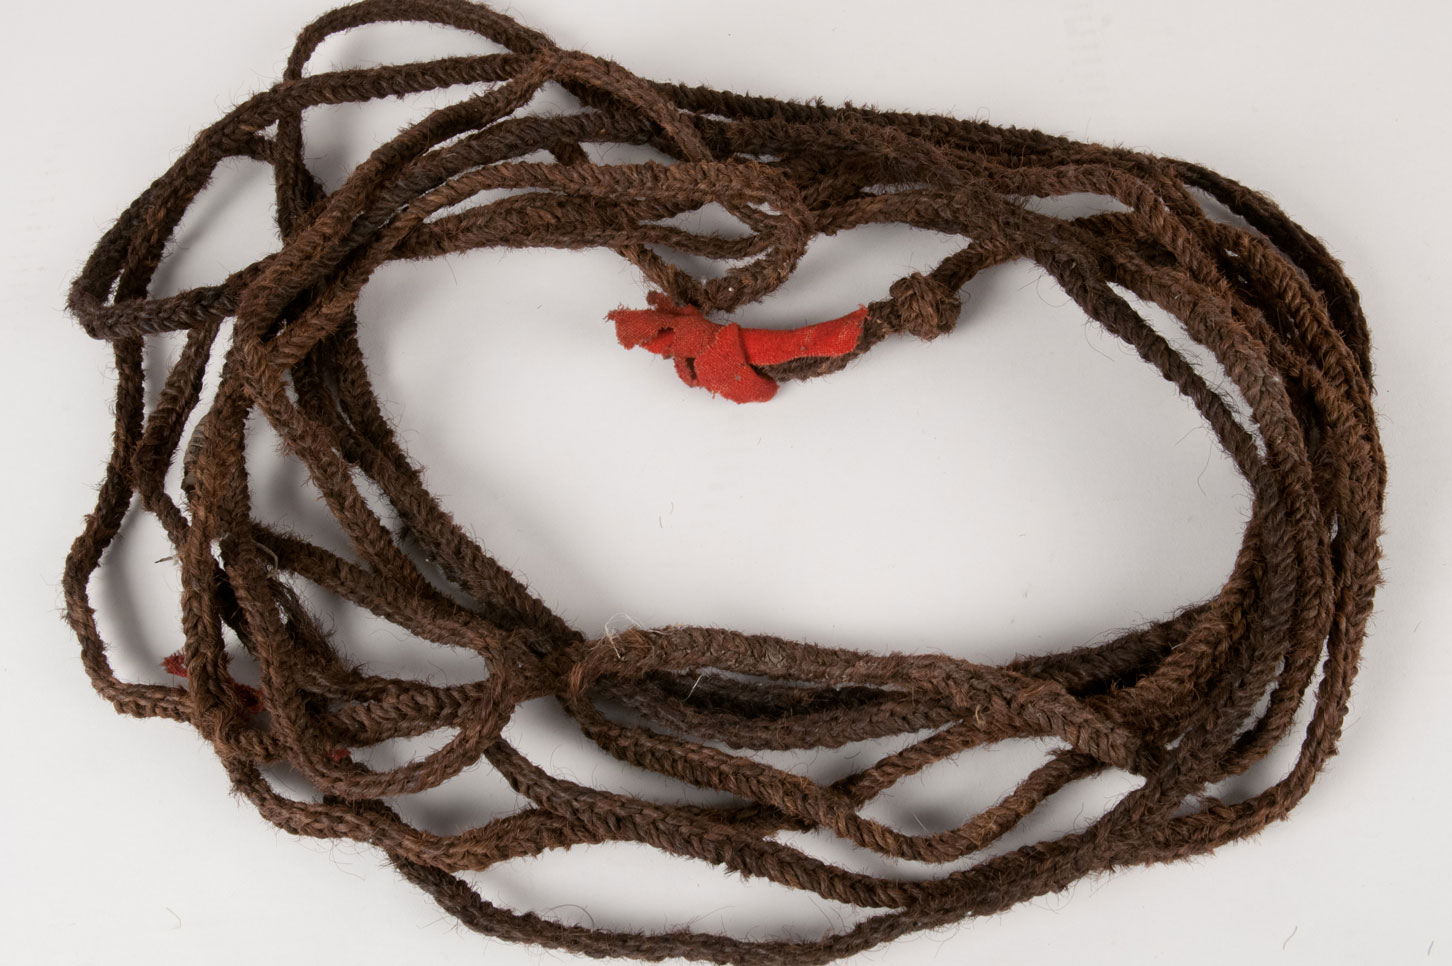 Woven bison hair rope with knotted ends decorated with red wool broadcloth. The weaving of the rope is done with five tightly woven two-ply twisted strands of lengths of bison hair approximately five-eight inches, which have been continuously added to each strand to produce length.